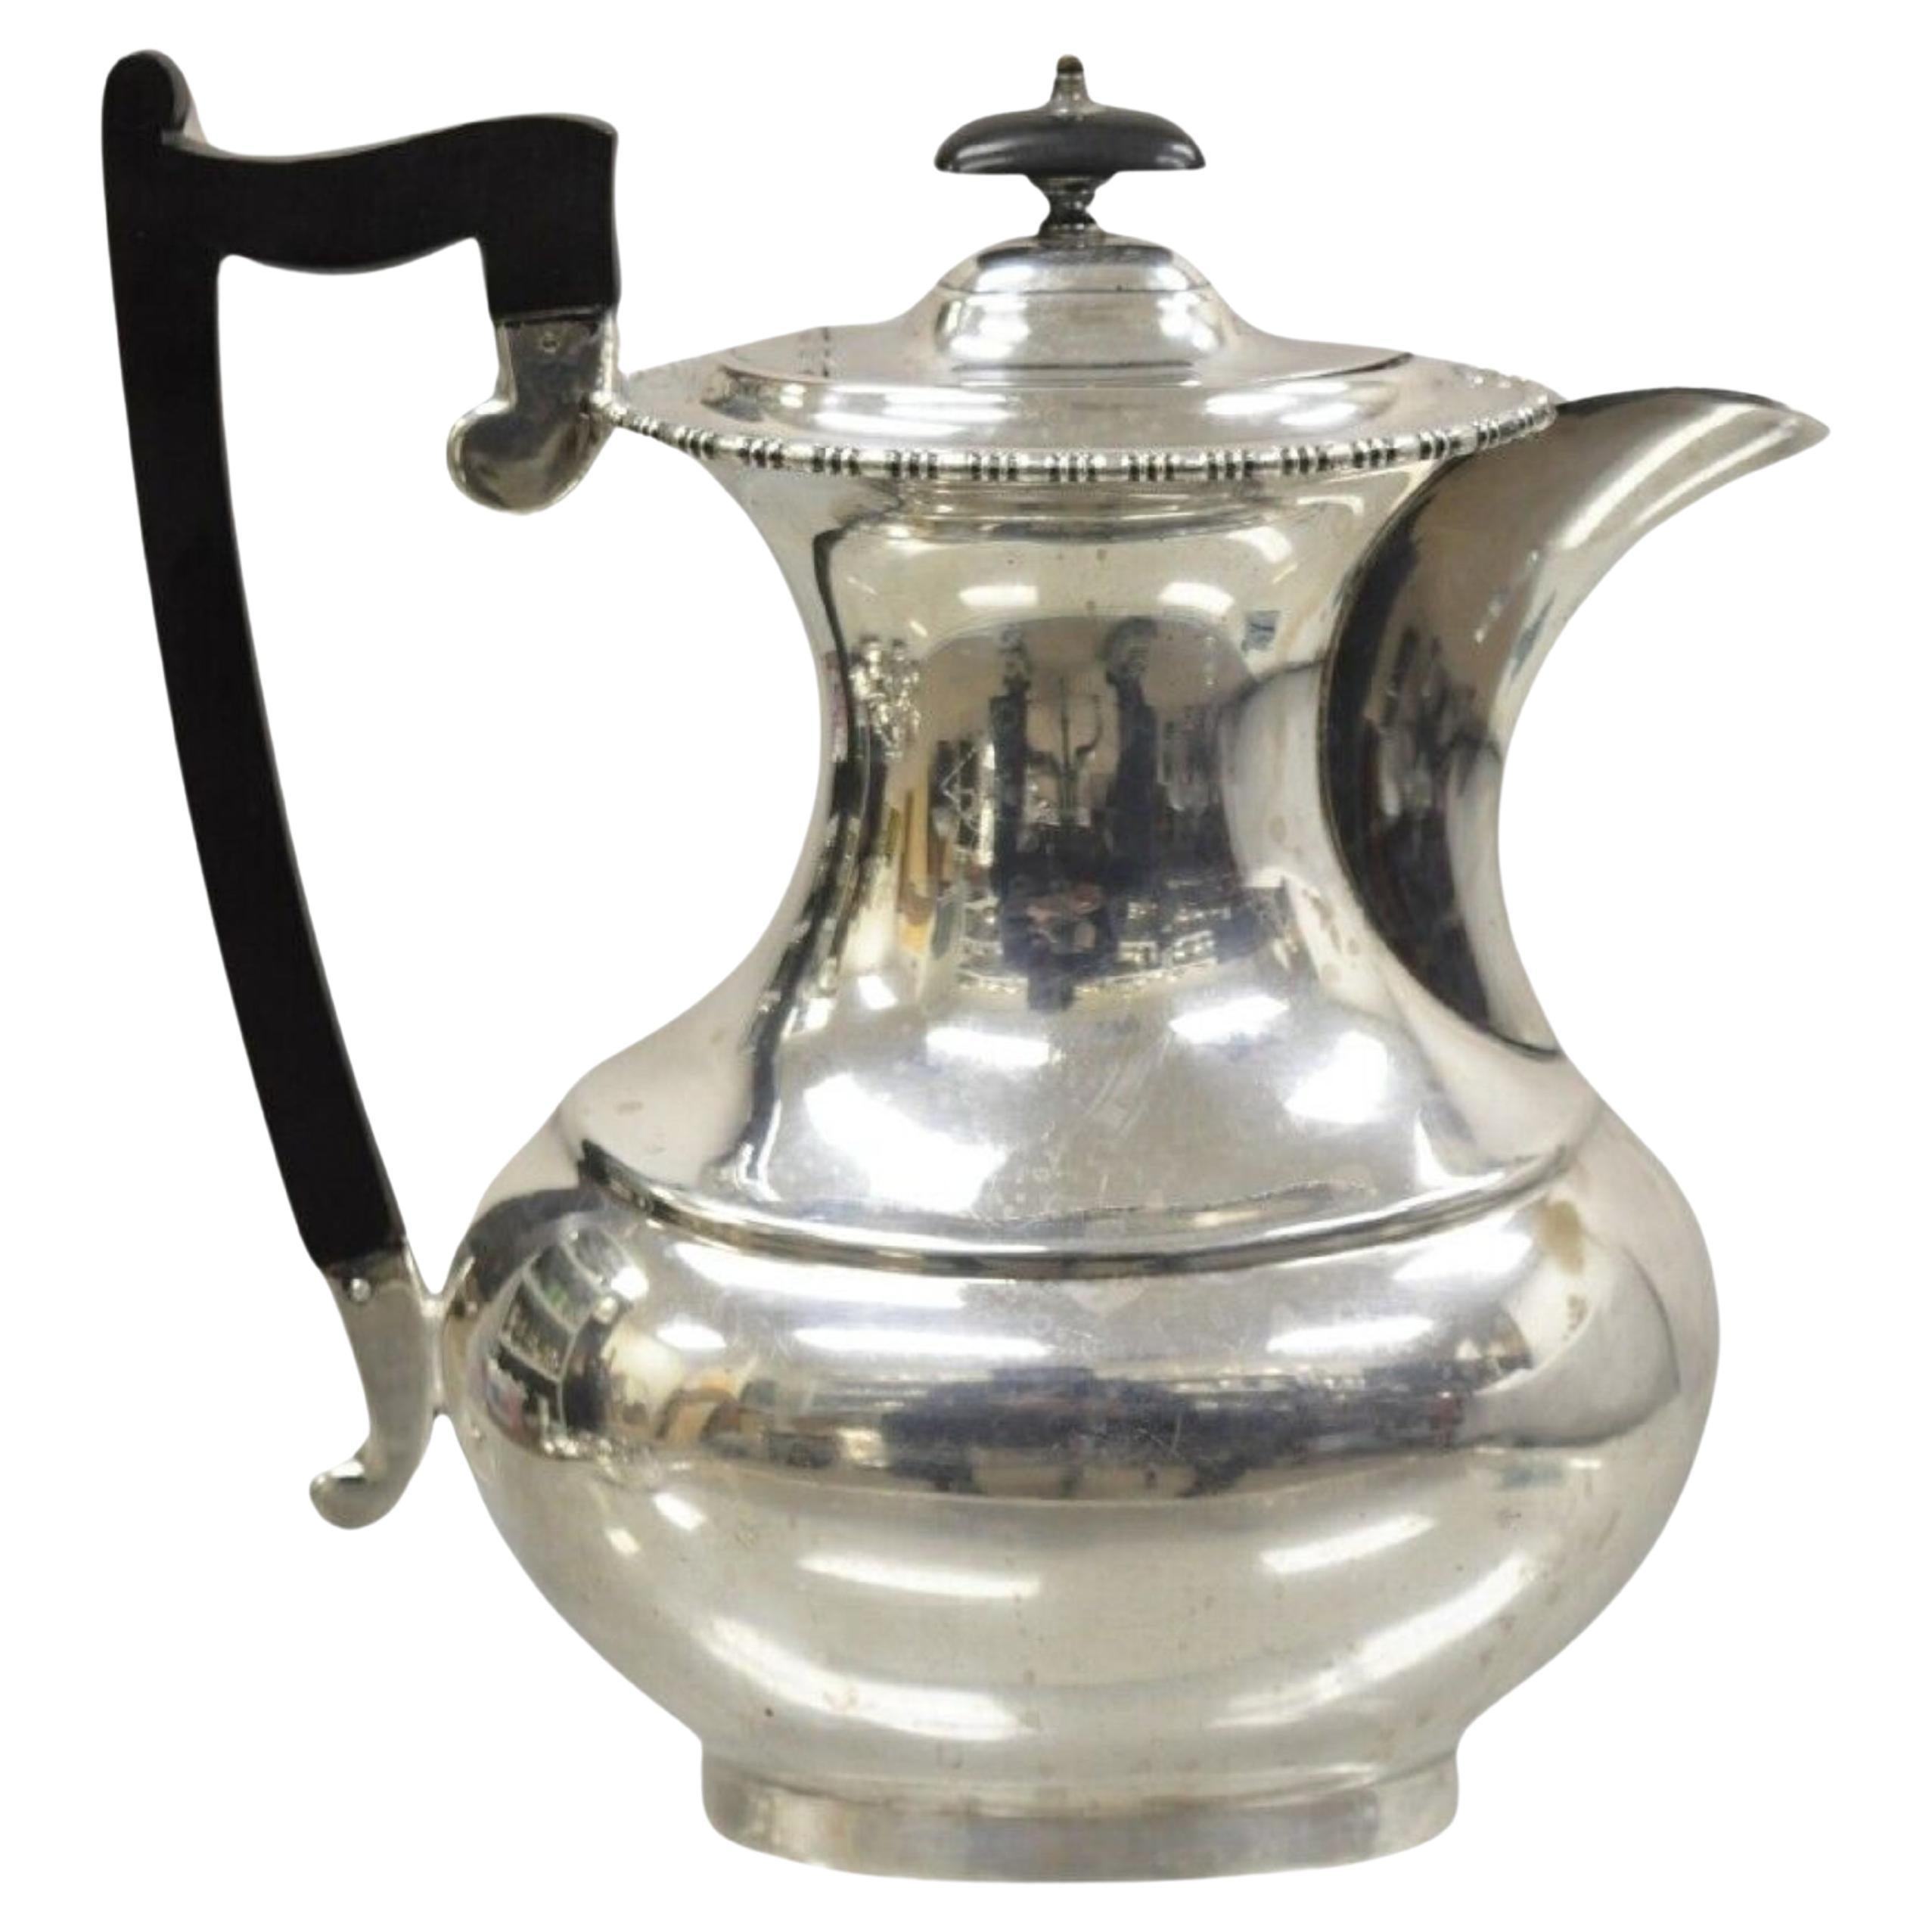 English Victorian Sheffield James Ramsay Dundee Silver Plated Coffee Tea Pot